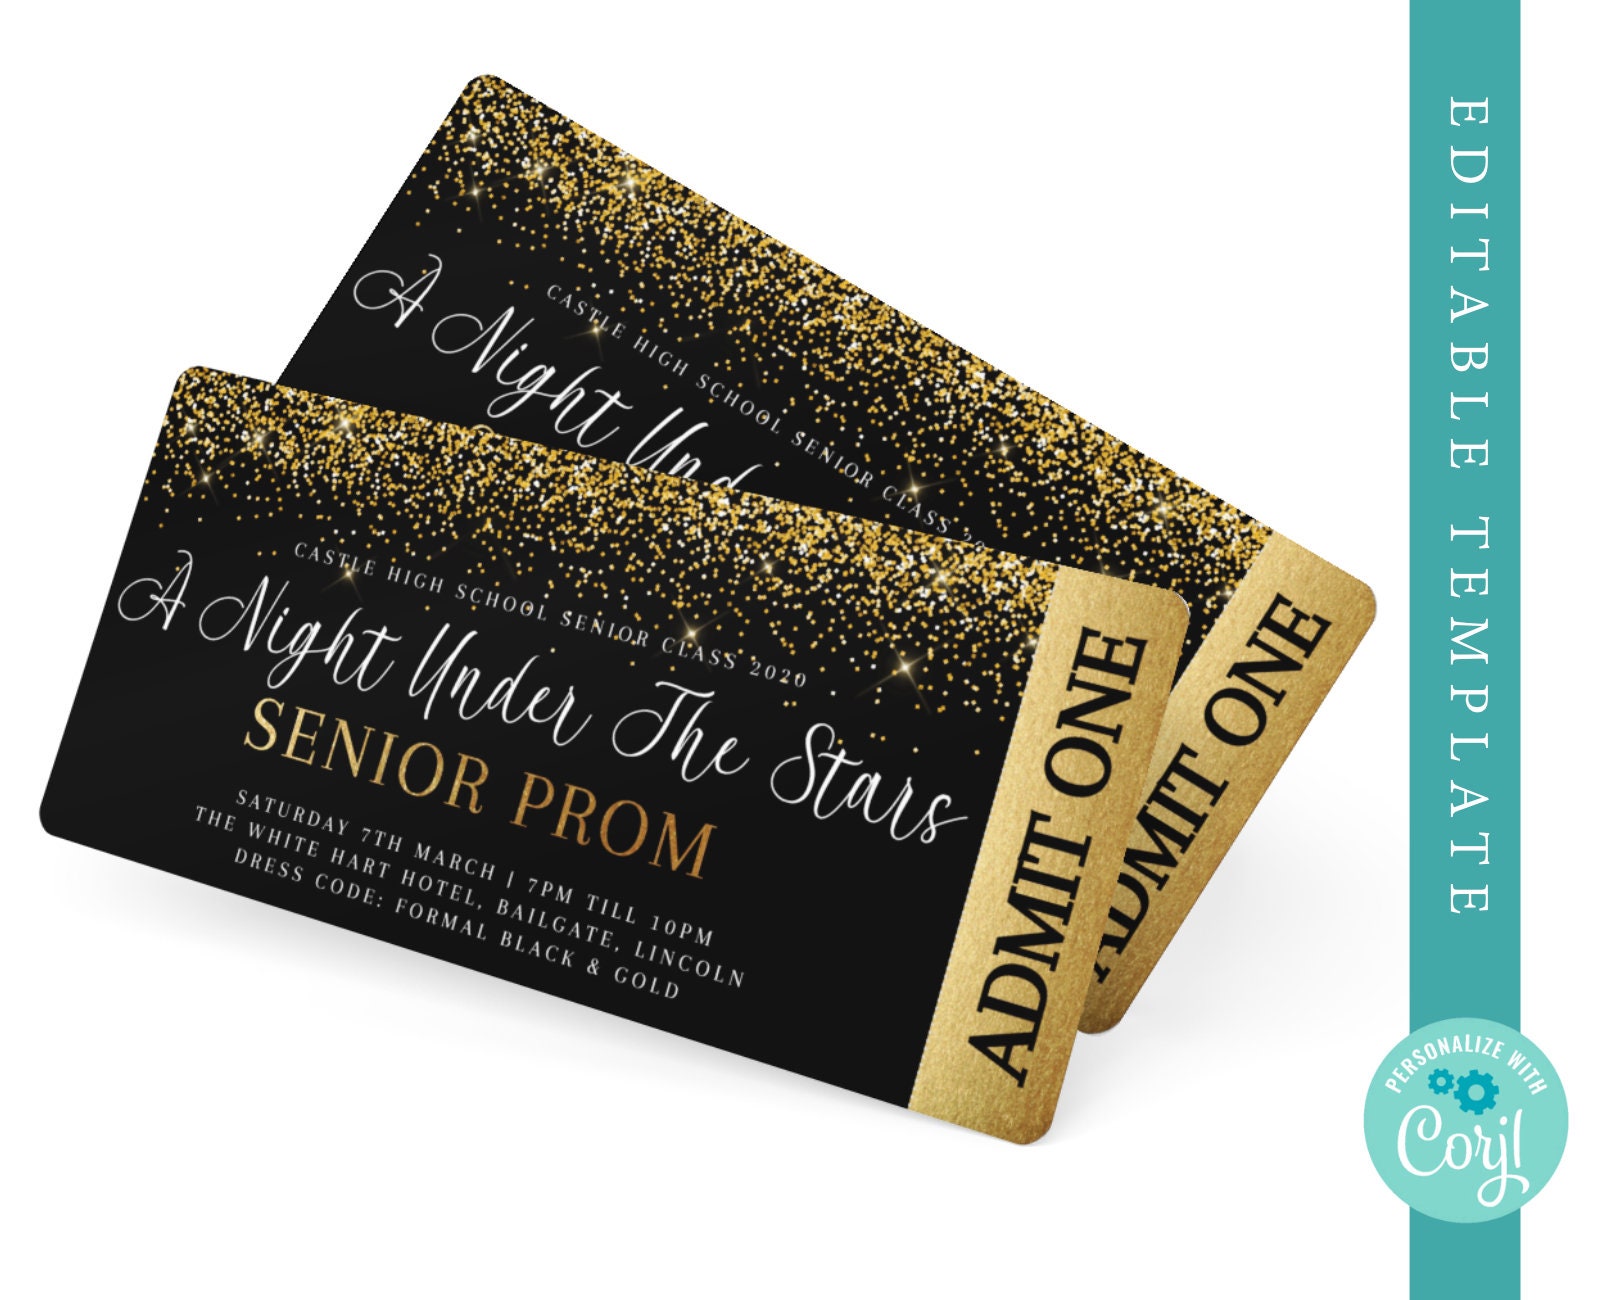 After-Prom Tickets — Windsor Charter Academy